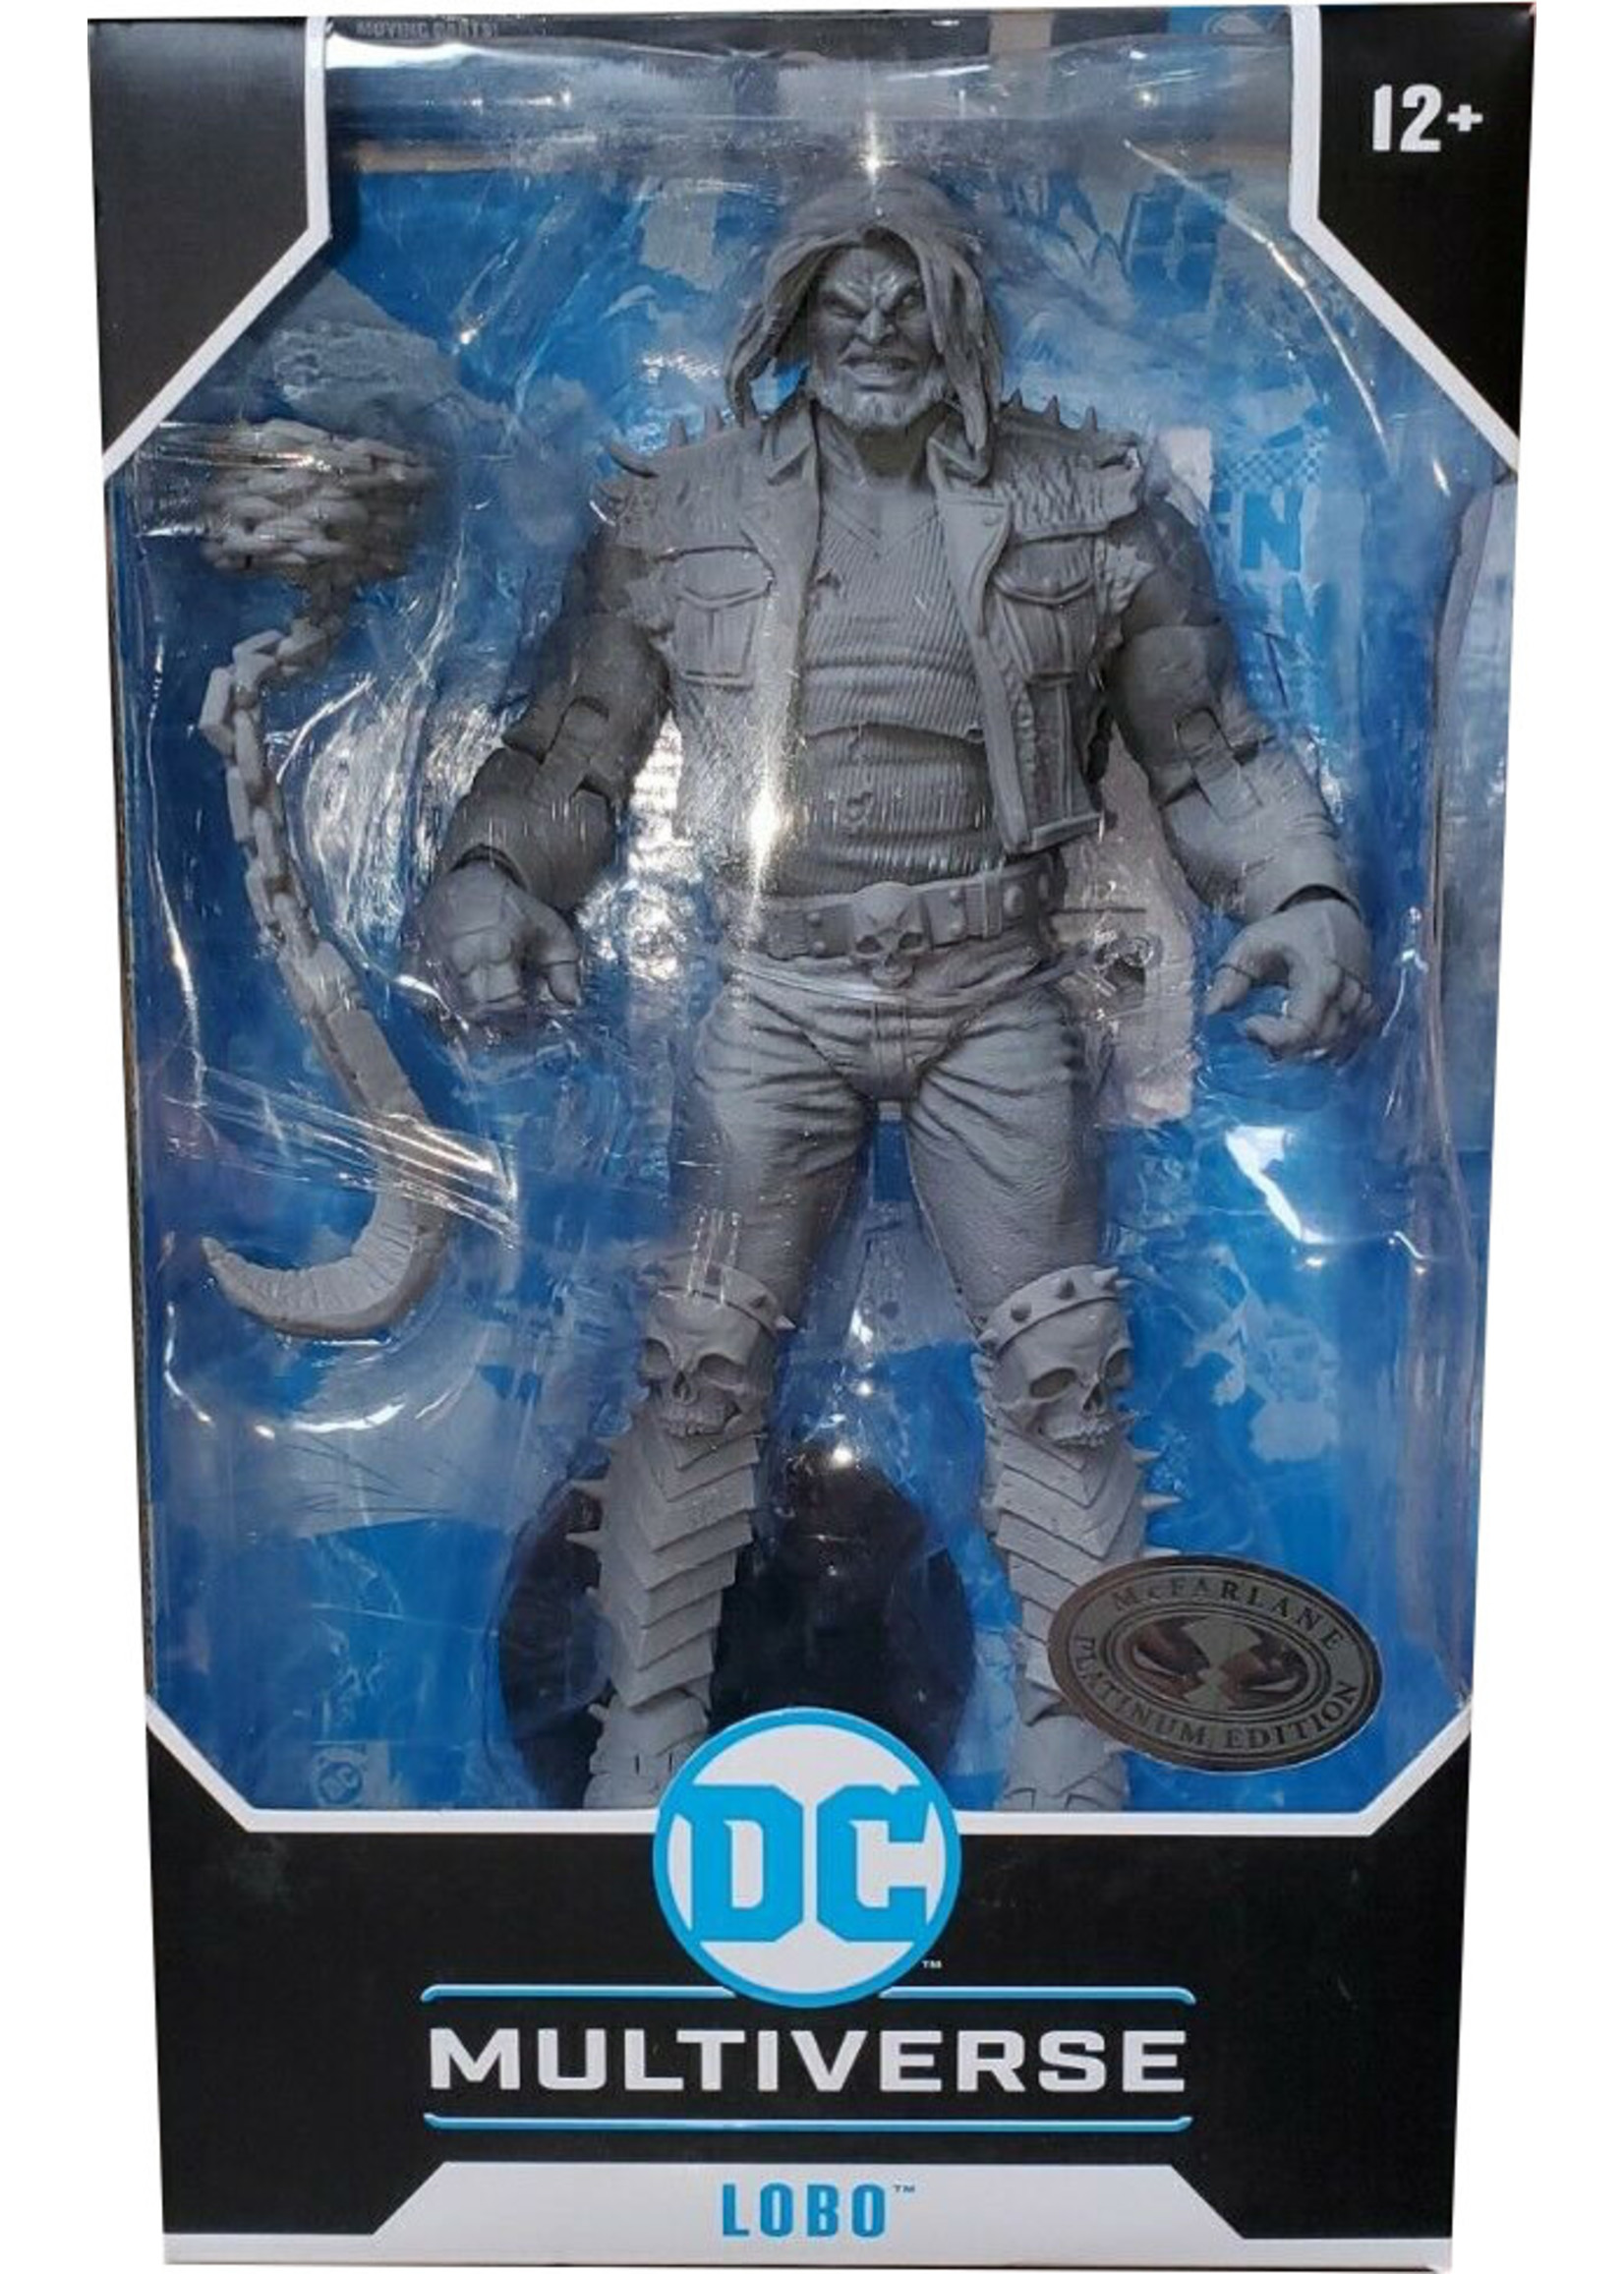 MCFARLANE TOYS DC MULTIVERSE 7IN LOBO PLATINUM EDITION CHASE VARIANT